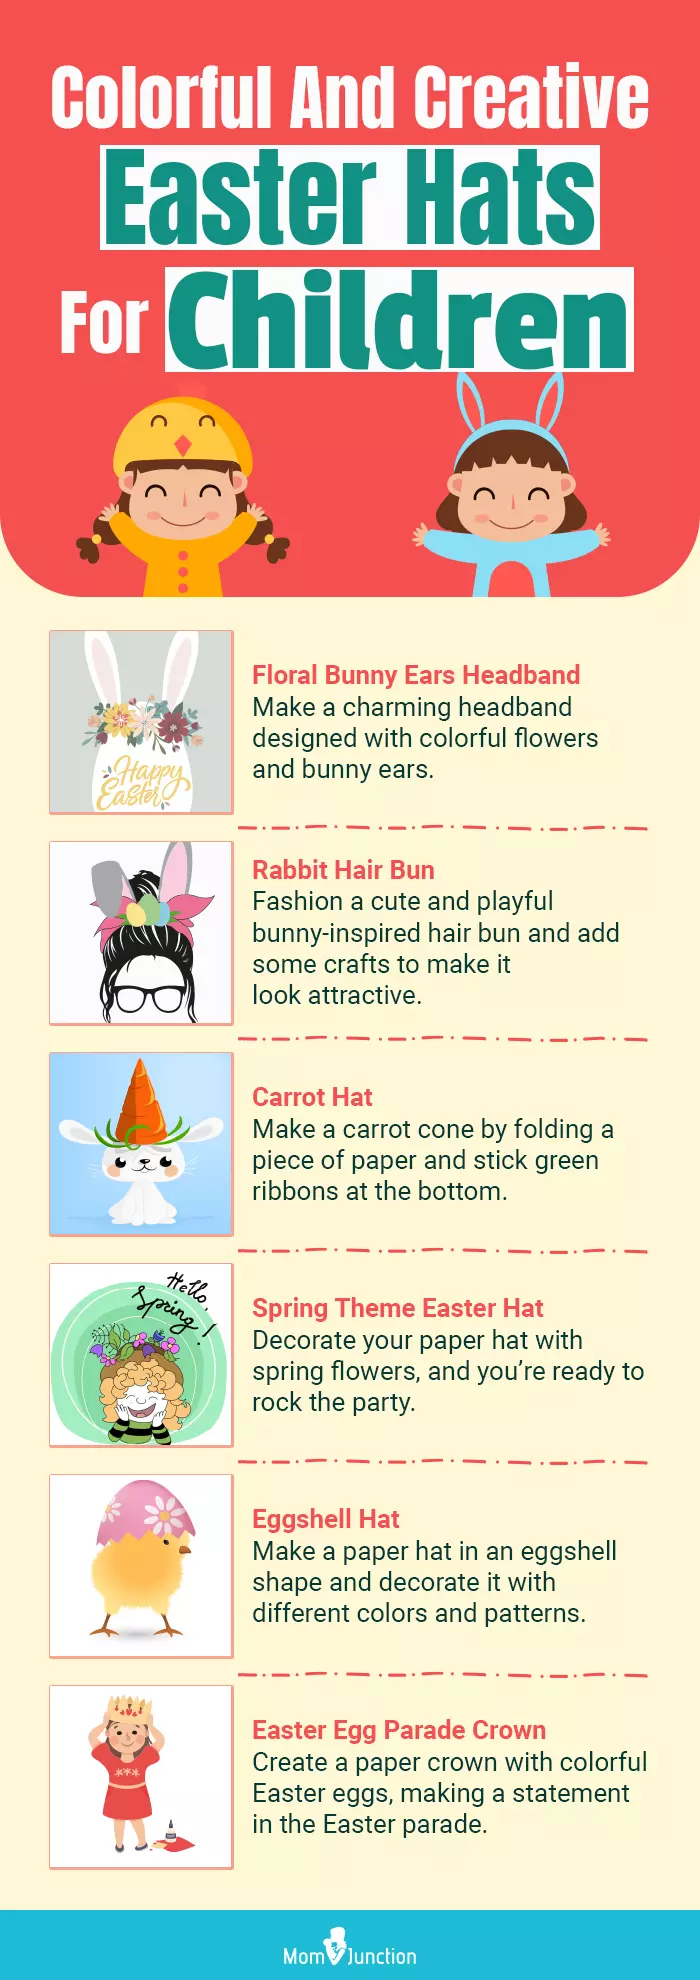 colorful and creative easter hats for children (infographic)